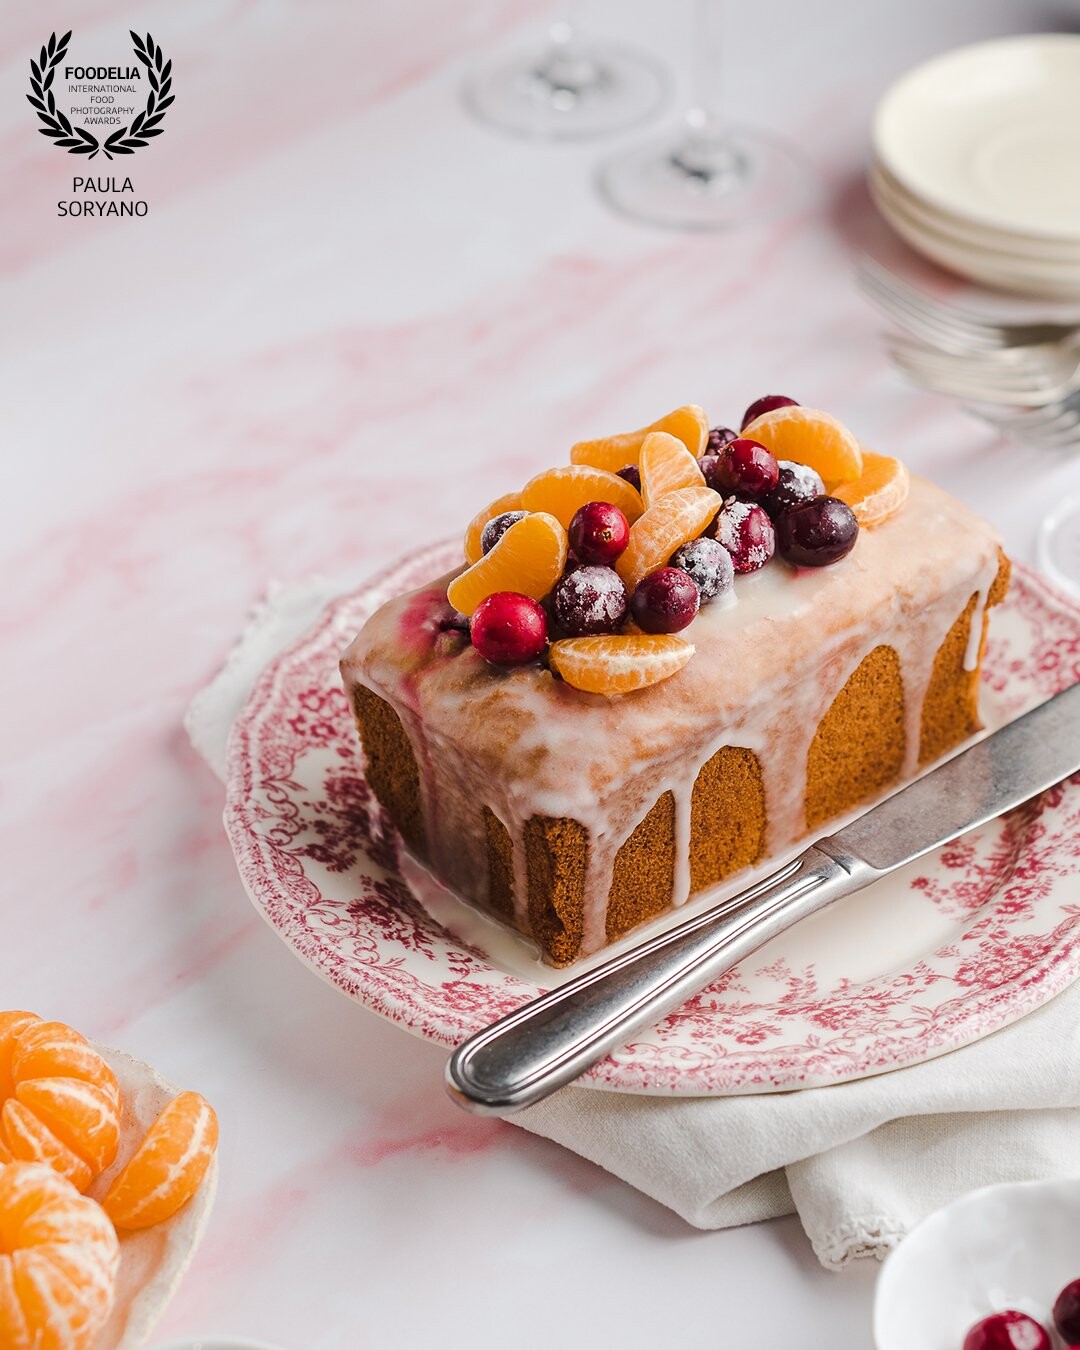 Bringing some shine to the gray days of January with this pink-ish soft tones cranberry cake capture. The light comes slightly from the back from a speedlight & a rectangular softbox (perfect for creating this airy feel).